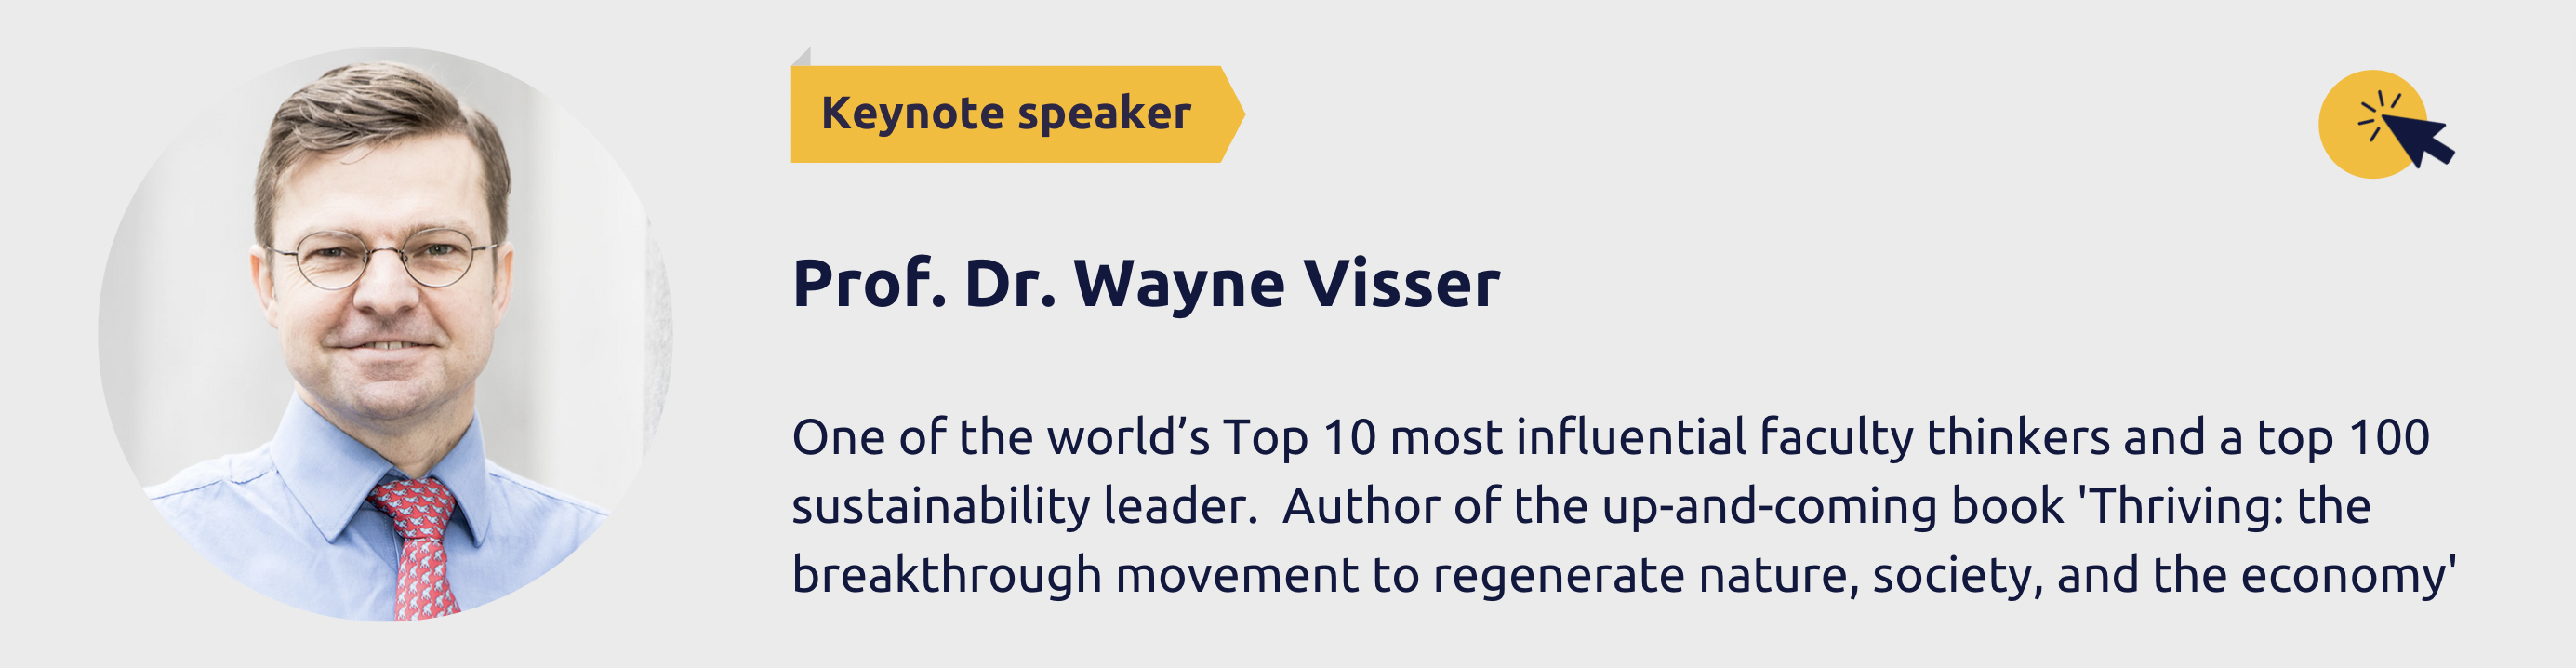 Prof. Dr. Wayne Visser is one of the world's Top 10 most influential faculty thinkers and a top 100 sustainability leader. Author of the up-and-coming book 'Thriving: the breakthrough movement to regenerate nature, society, and the economy'